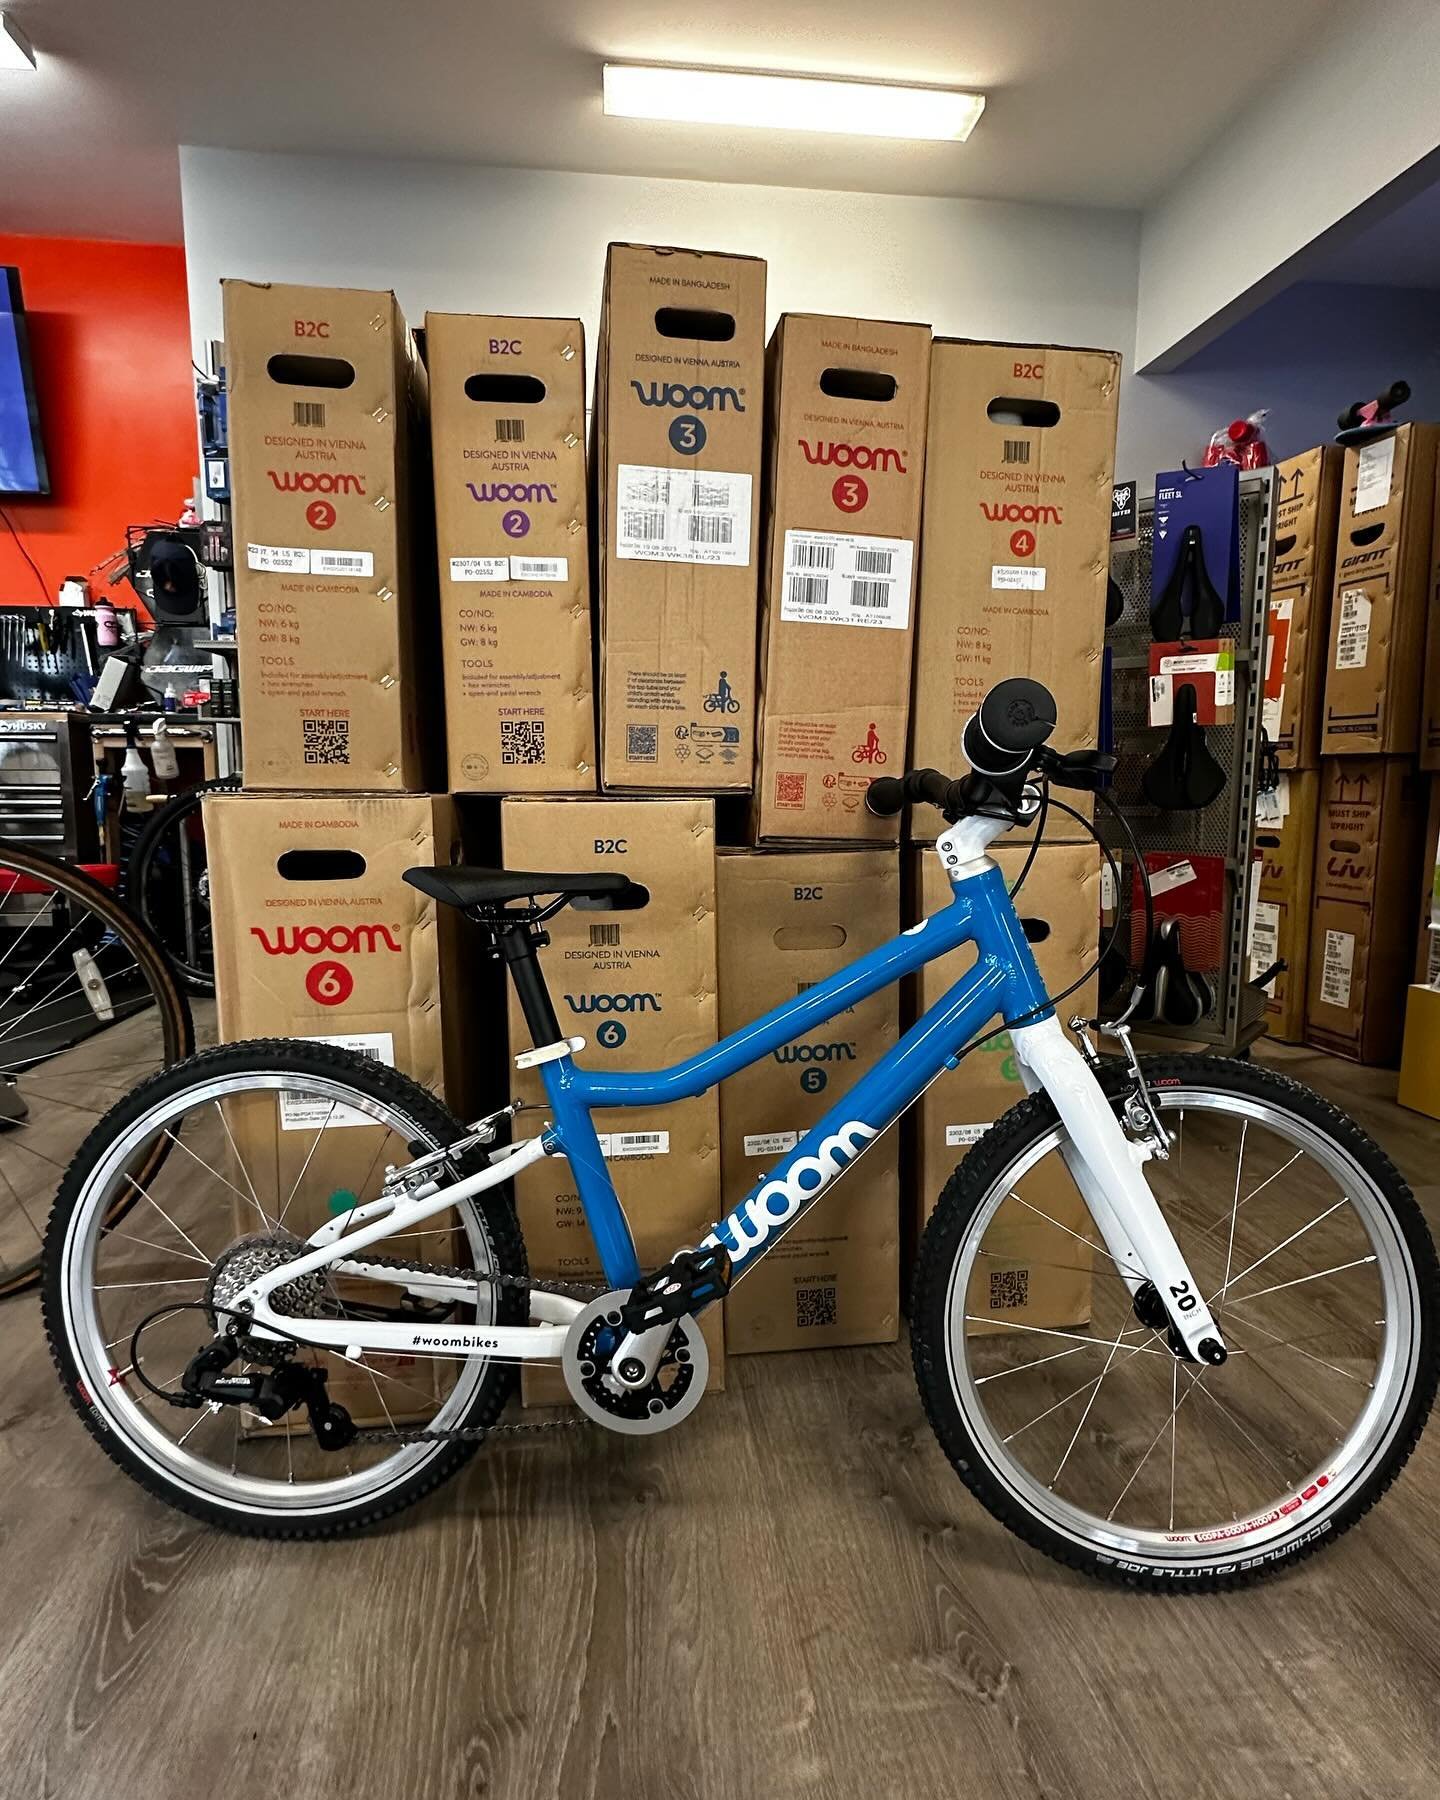 Shipment of @woombikesusa kids bikes just got here!

Come down and check out these lightweight, easy to use, and durable kids bikes before the initial order is gone!

Feel free to reach out or give us a call with any questions.